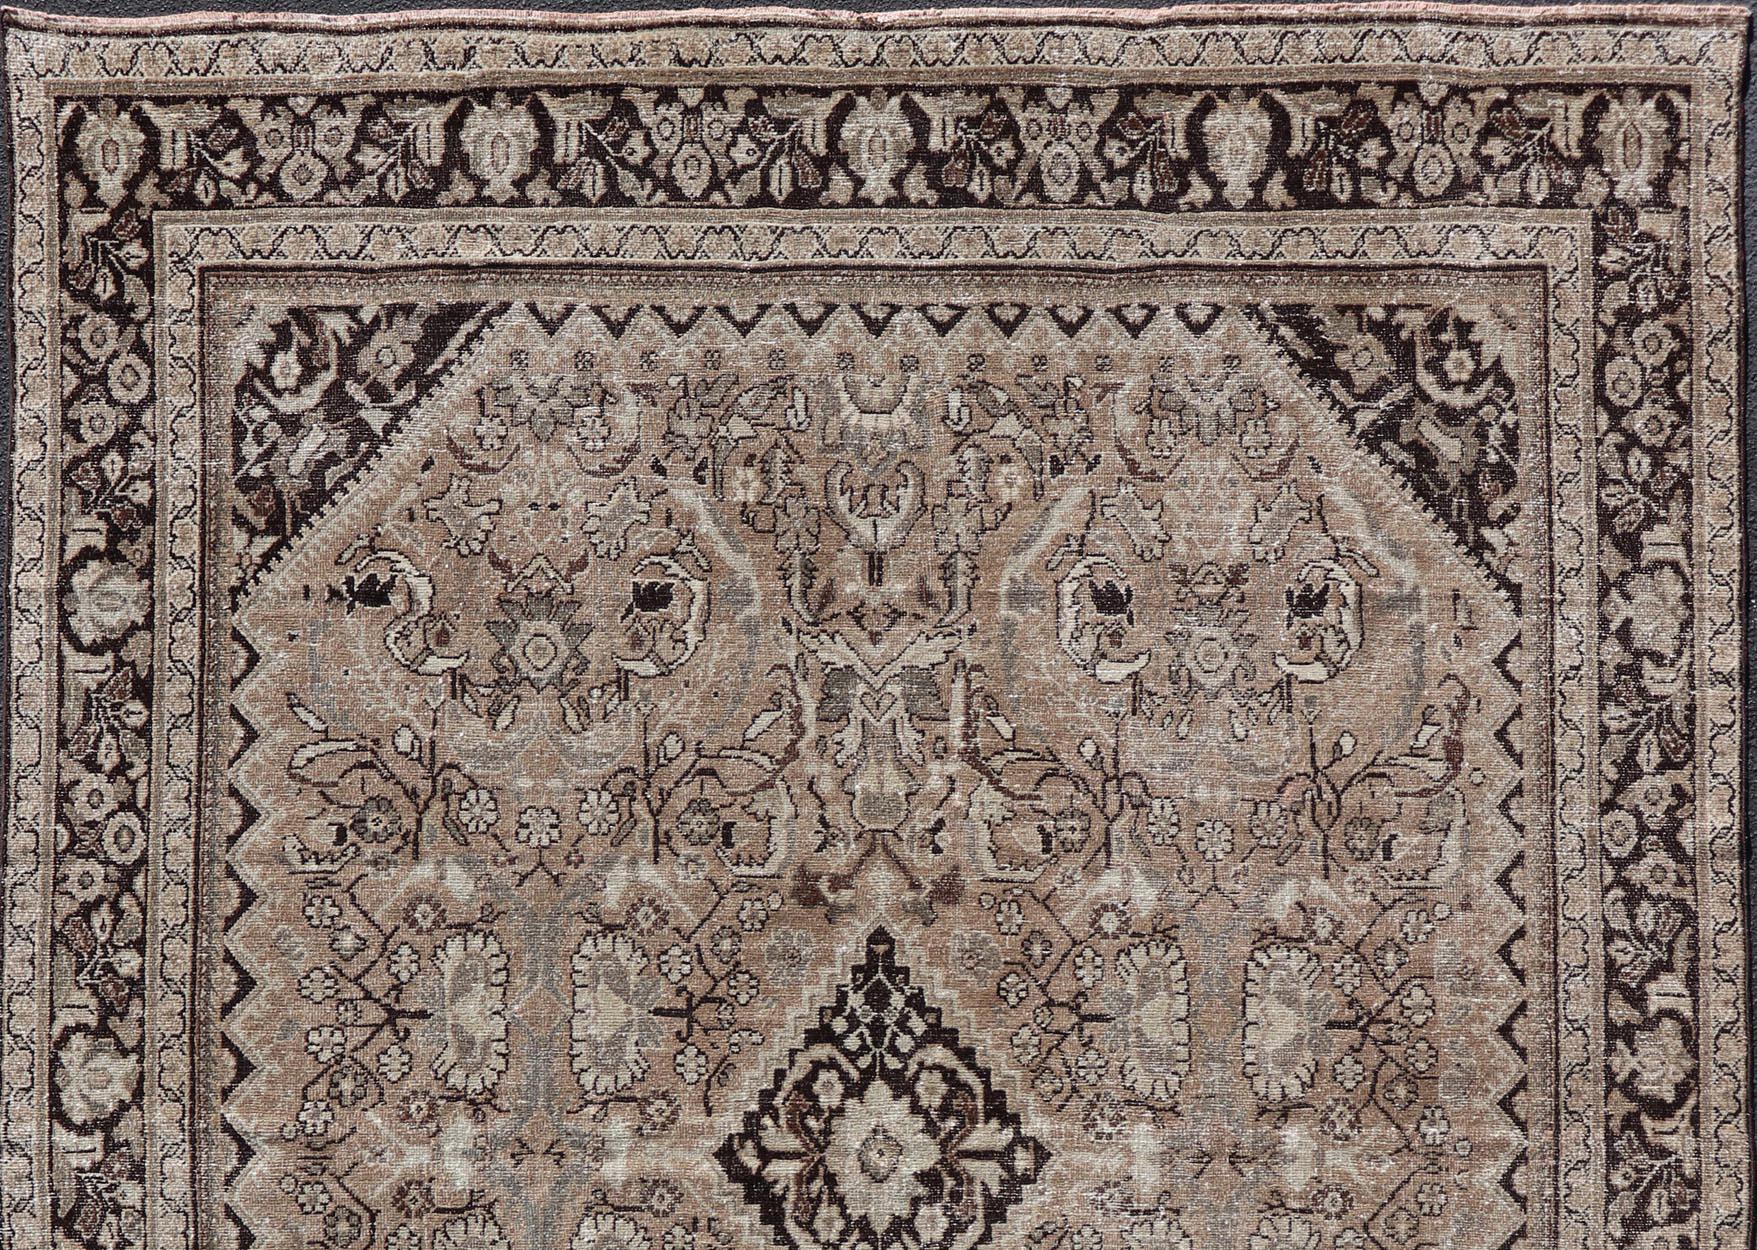 This vintage Sultanabad-Mahal rug features a sub-geometric diamond design with herati motifs. The rug is set upon a taupe background and is enclosed within a complementary multi-tiered border.

Vintage Sultanabad-Mahal Rug, rug PTA-200715, country